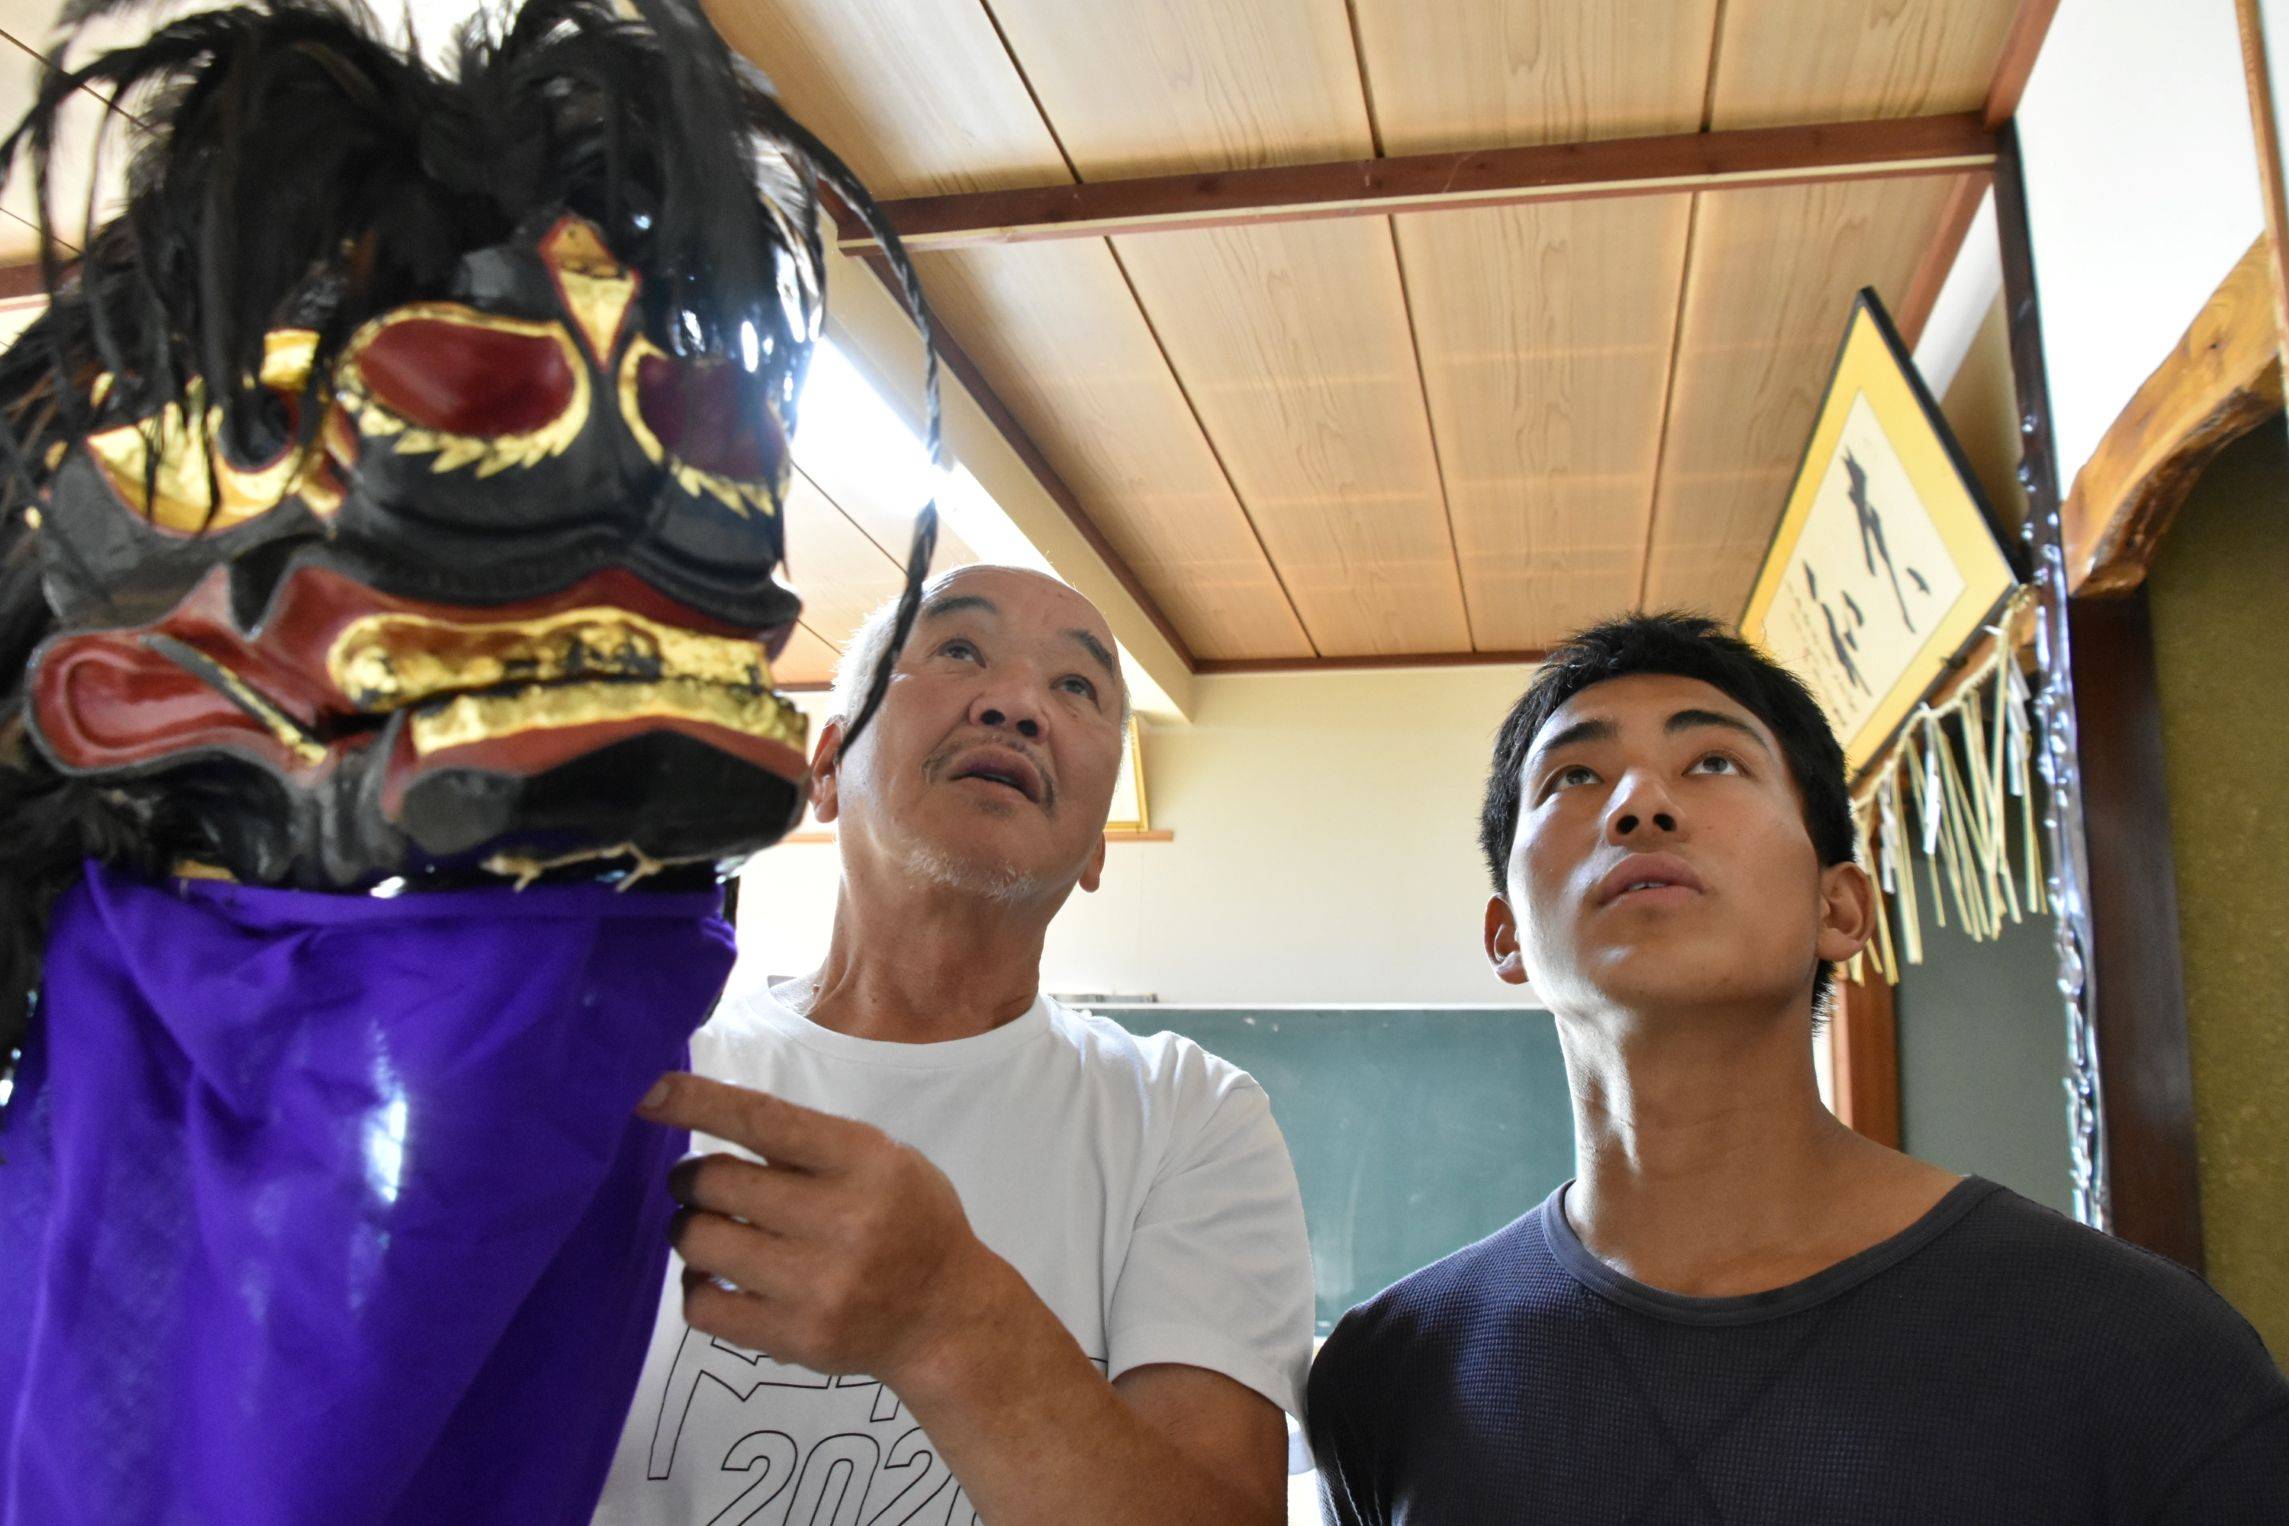 Kenichi Koike (left), head of a preservation group for Saikatsu no Higan-jishi, a traditional folk dance handed down in Fukushima Prefecture, explains its history to Takeo Oshima, a new member of the group, at a community center in Aizumisato in the prefecture. | FUKUSHIMA MINPO